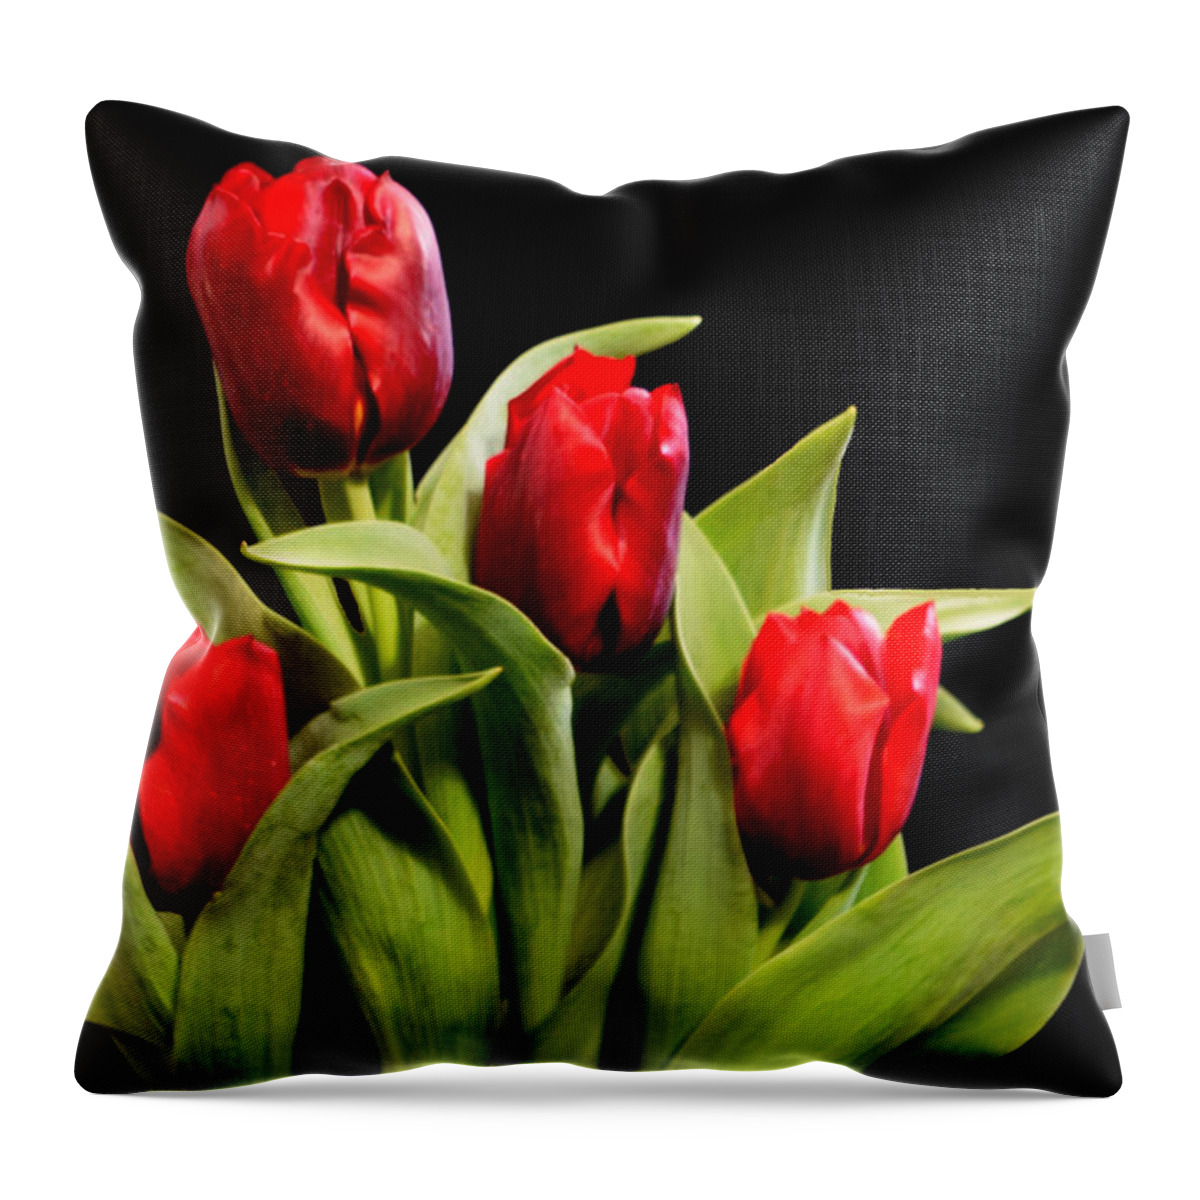 Tulips Throw Pillow featuring the photograph Four Tulips by R Allen Swezey